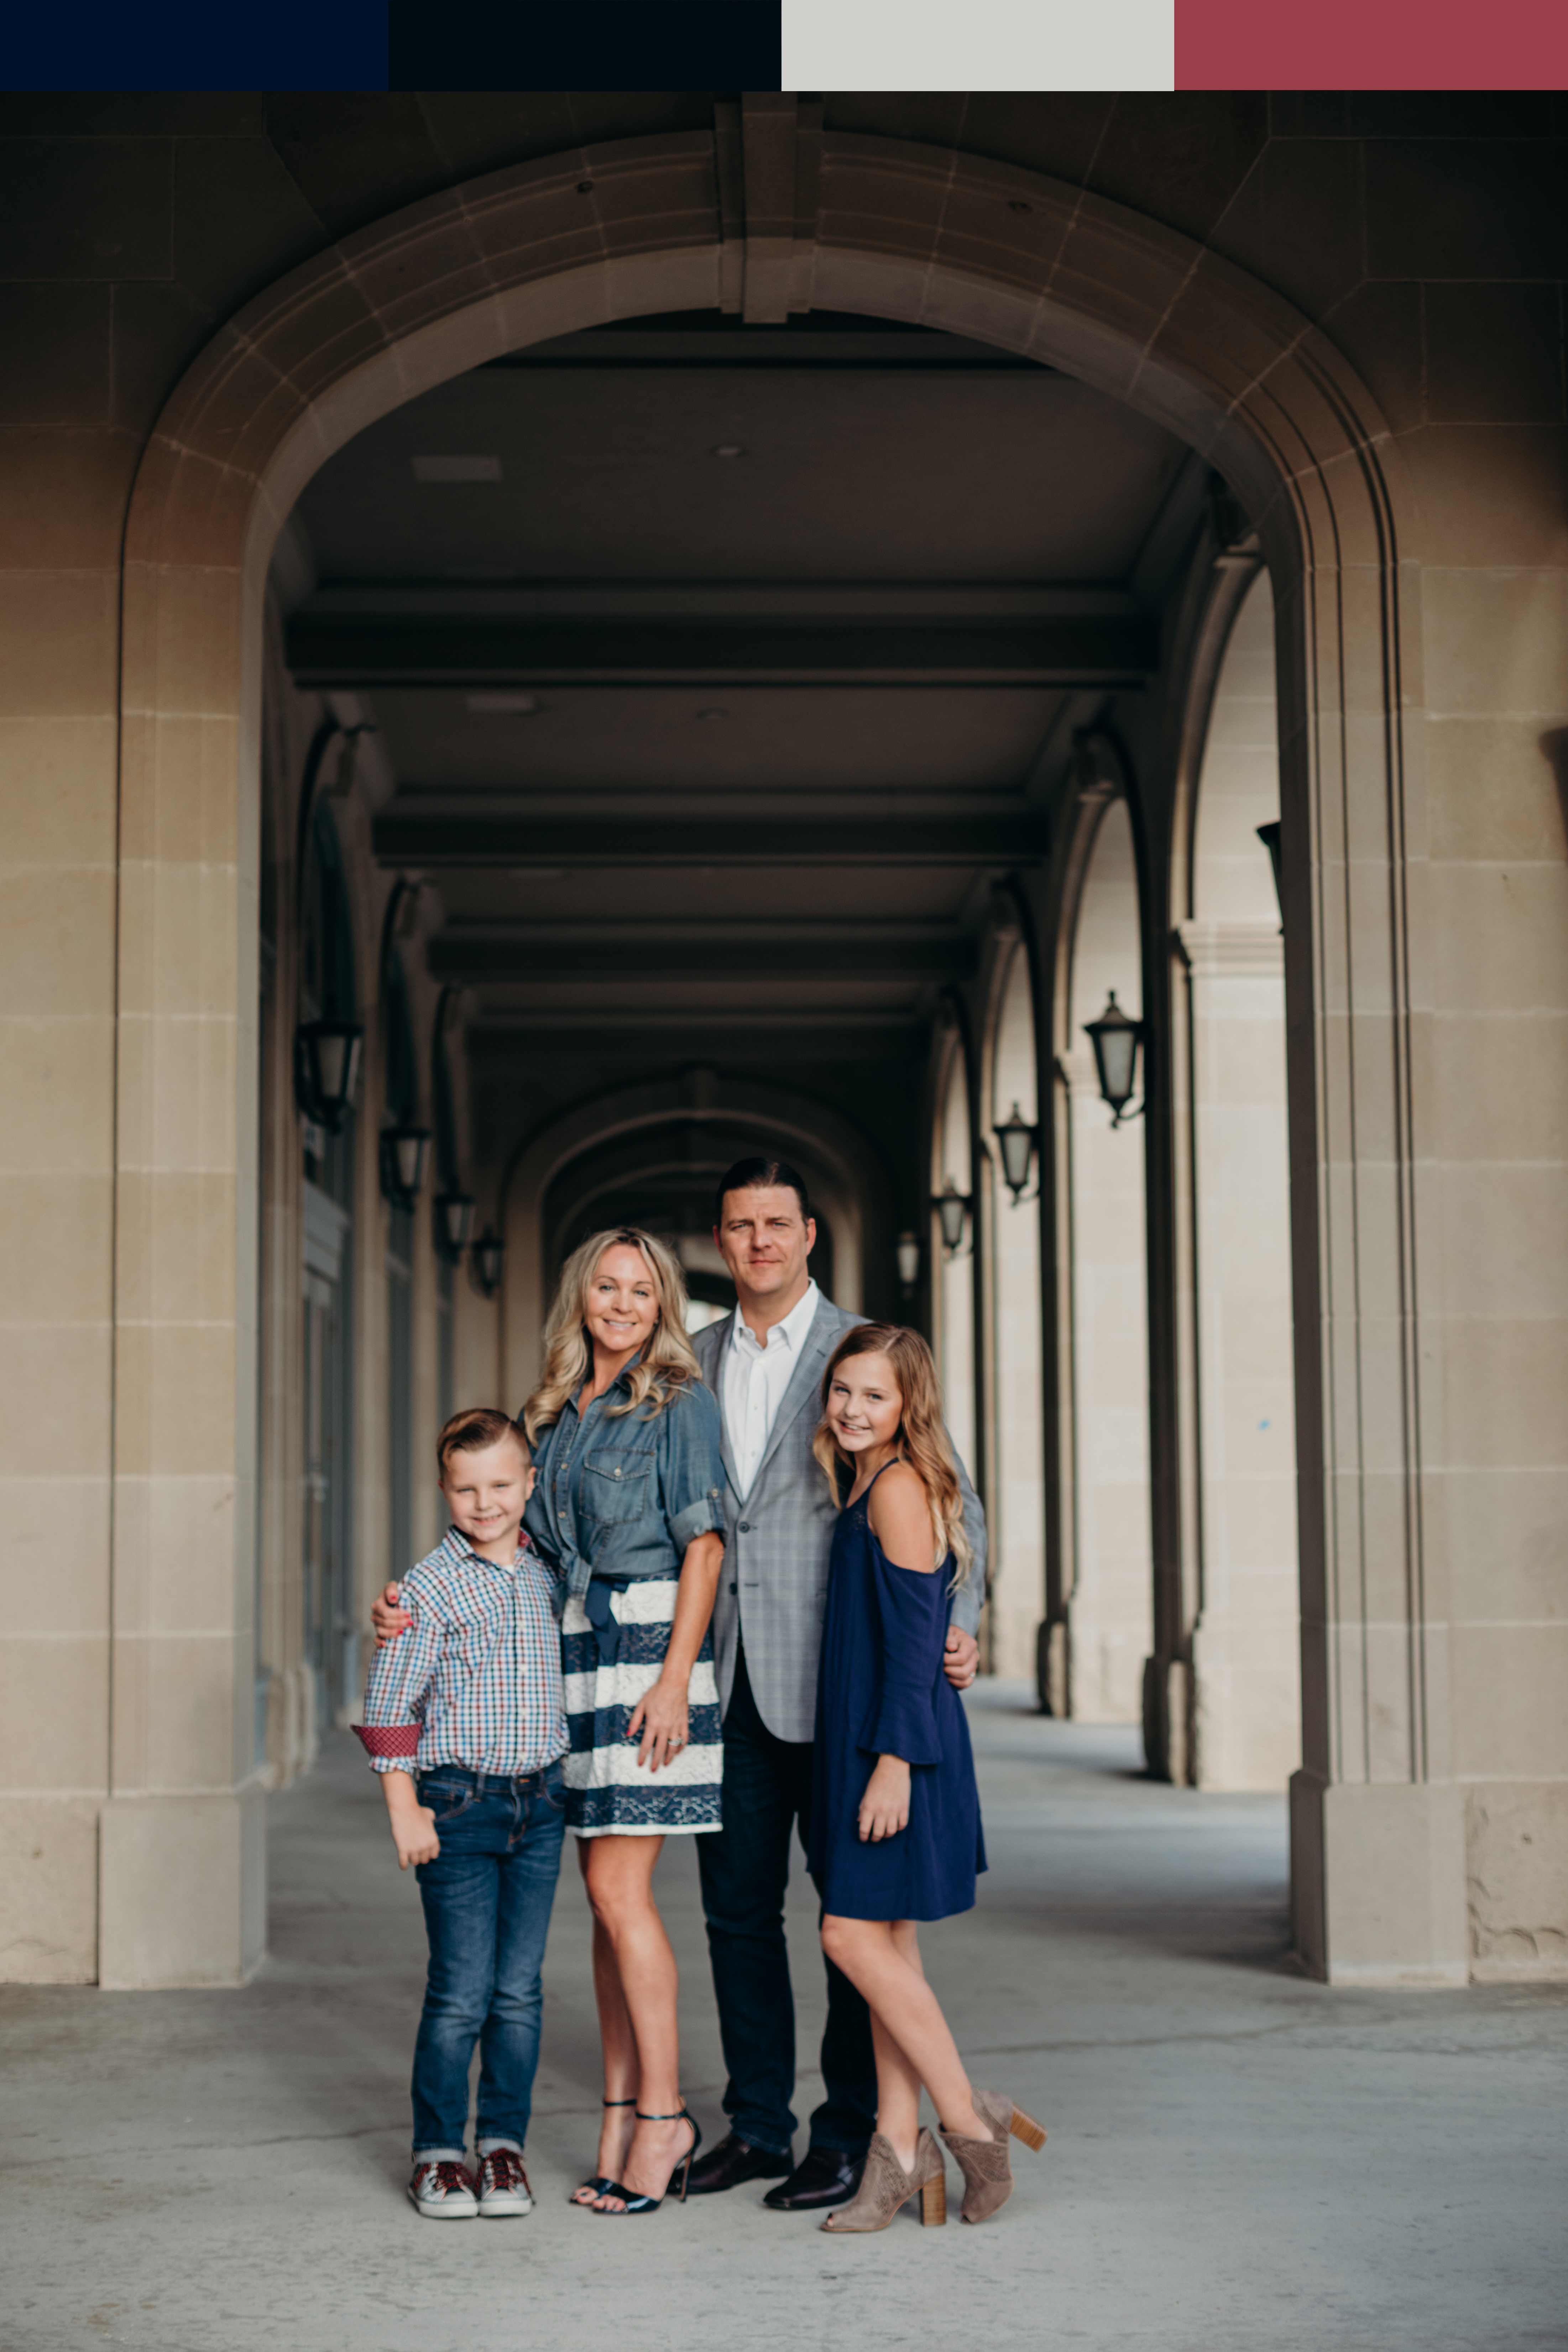 family photo inspiration, family photo outfit ideas, family photos, what to wear for family photos, dallas family photography 